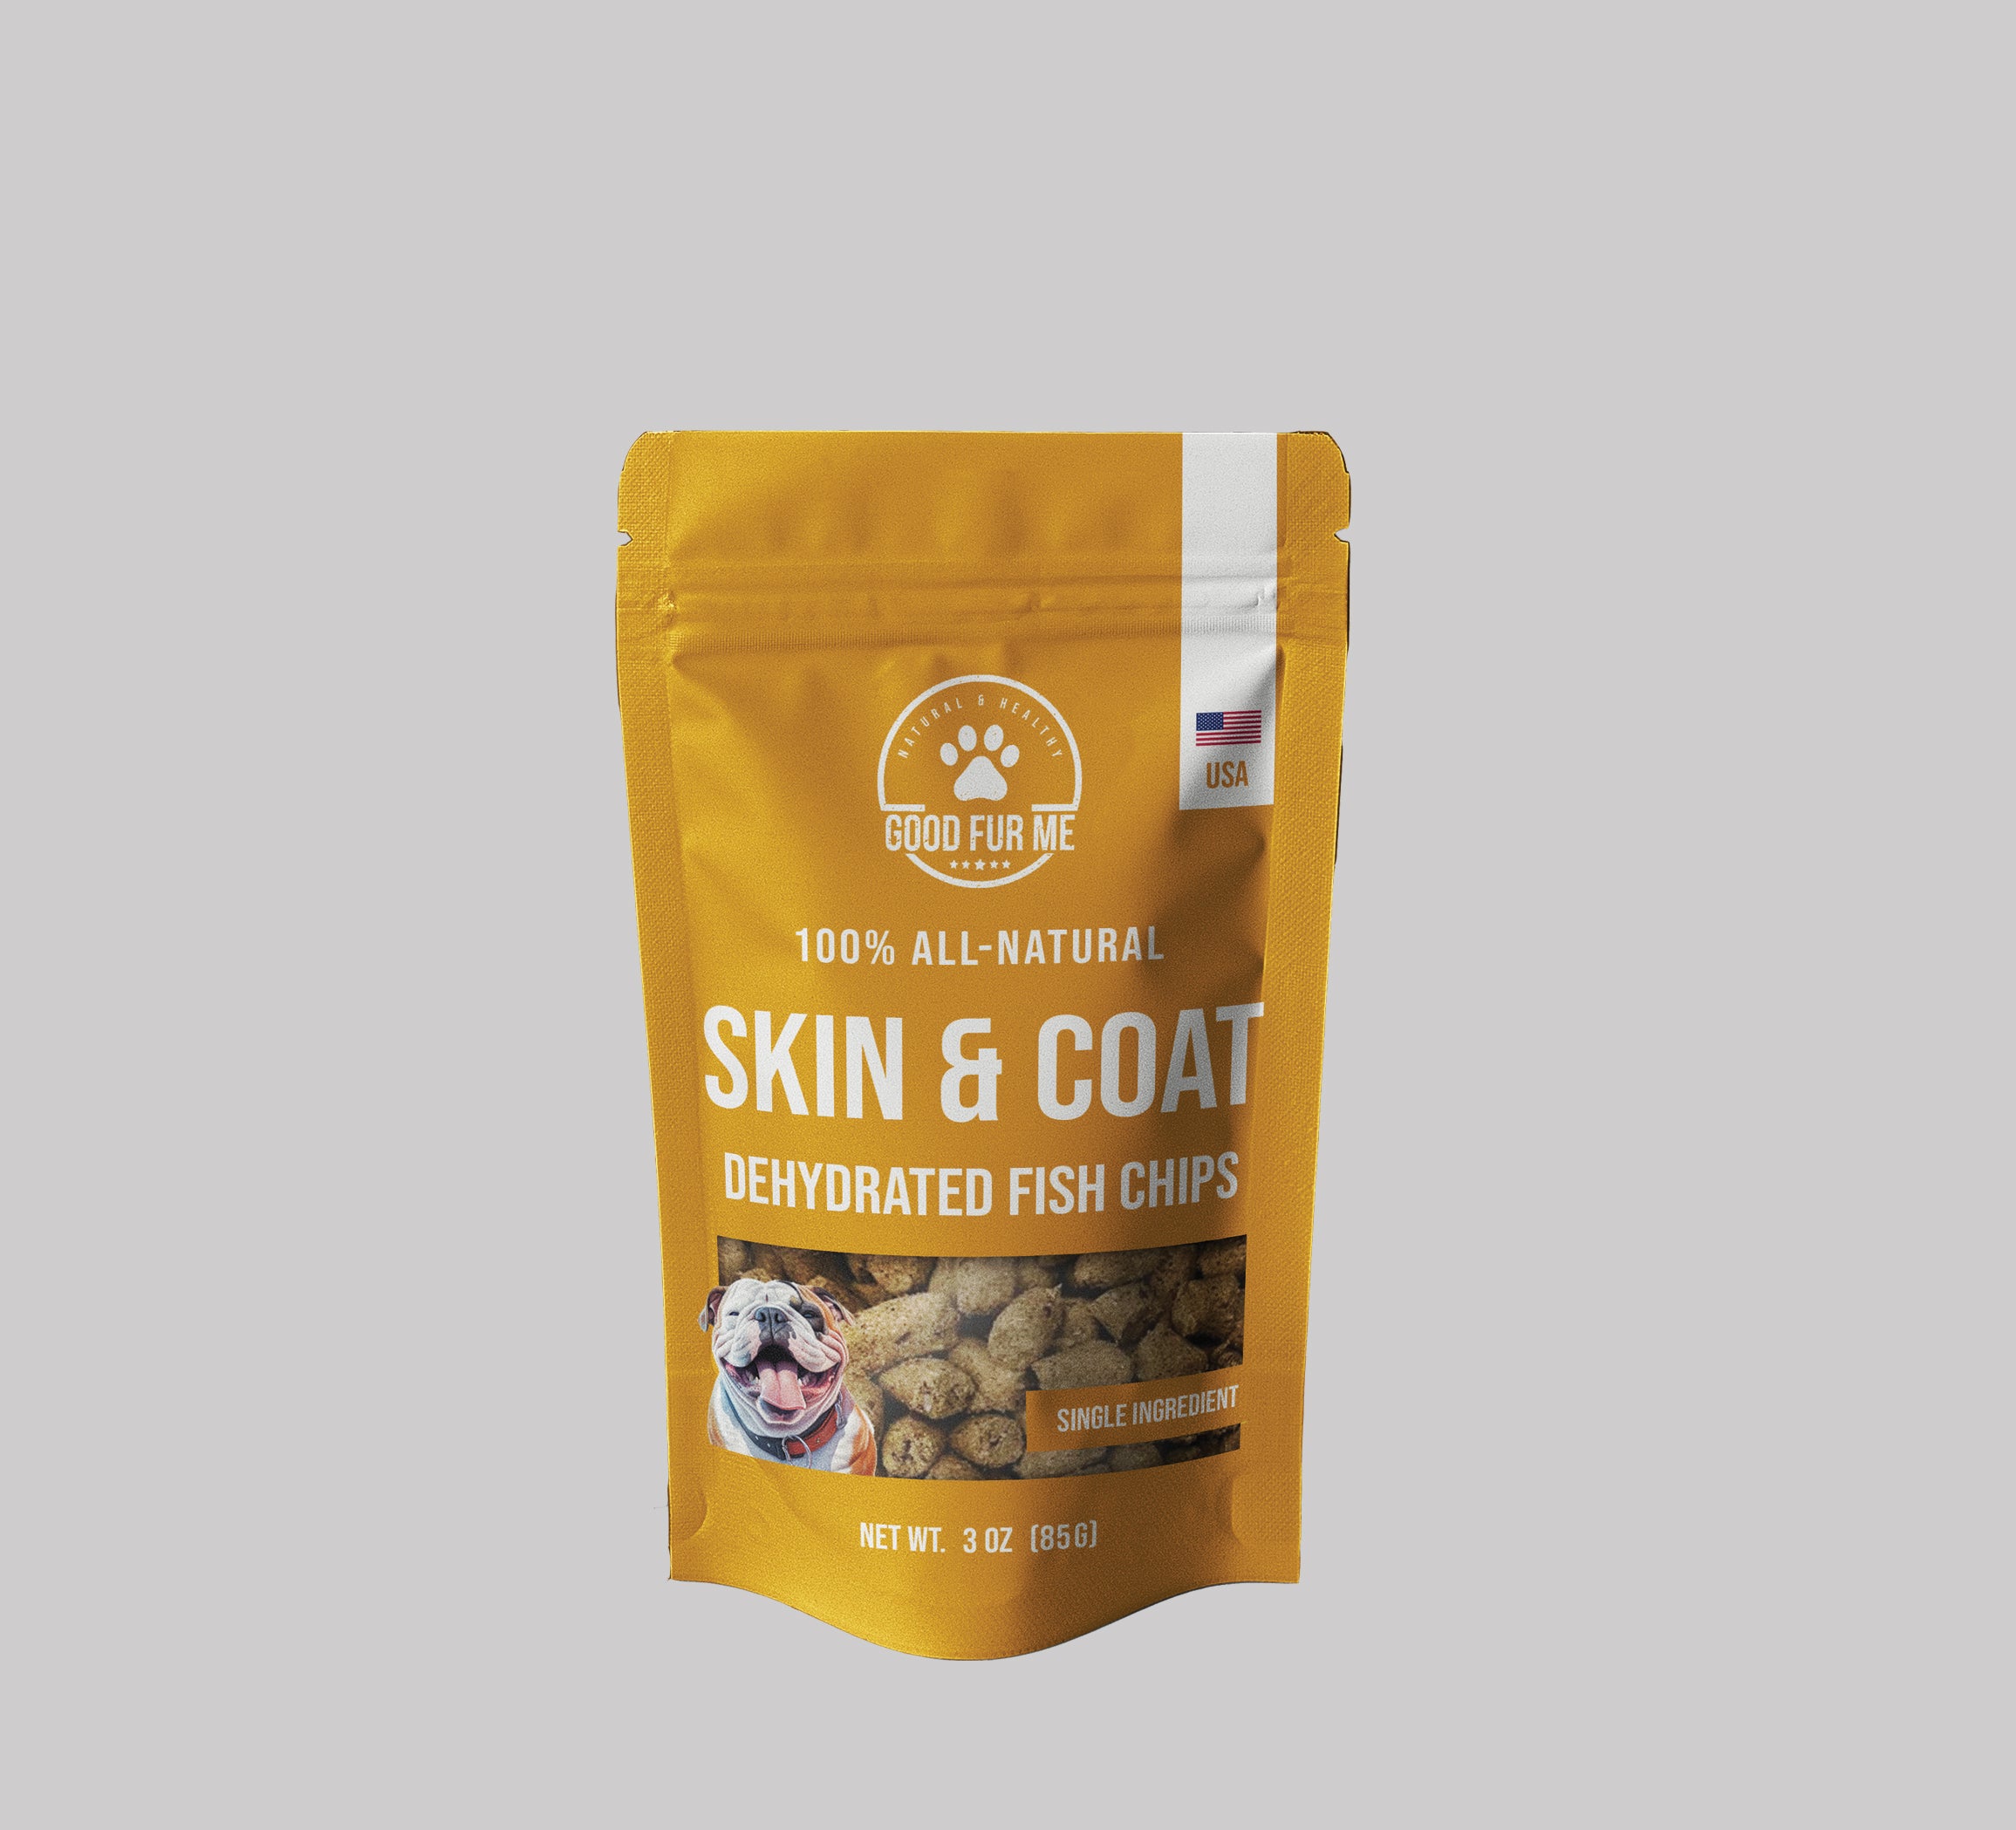 100% All-Natural Skin & Coat Dehydrated Fish Chips